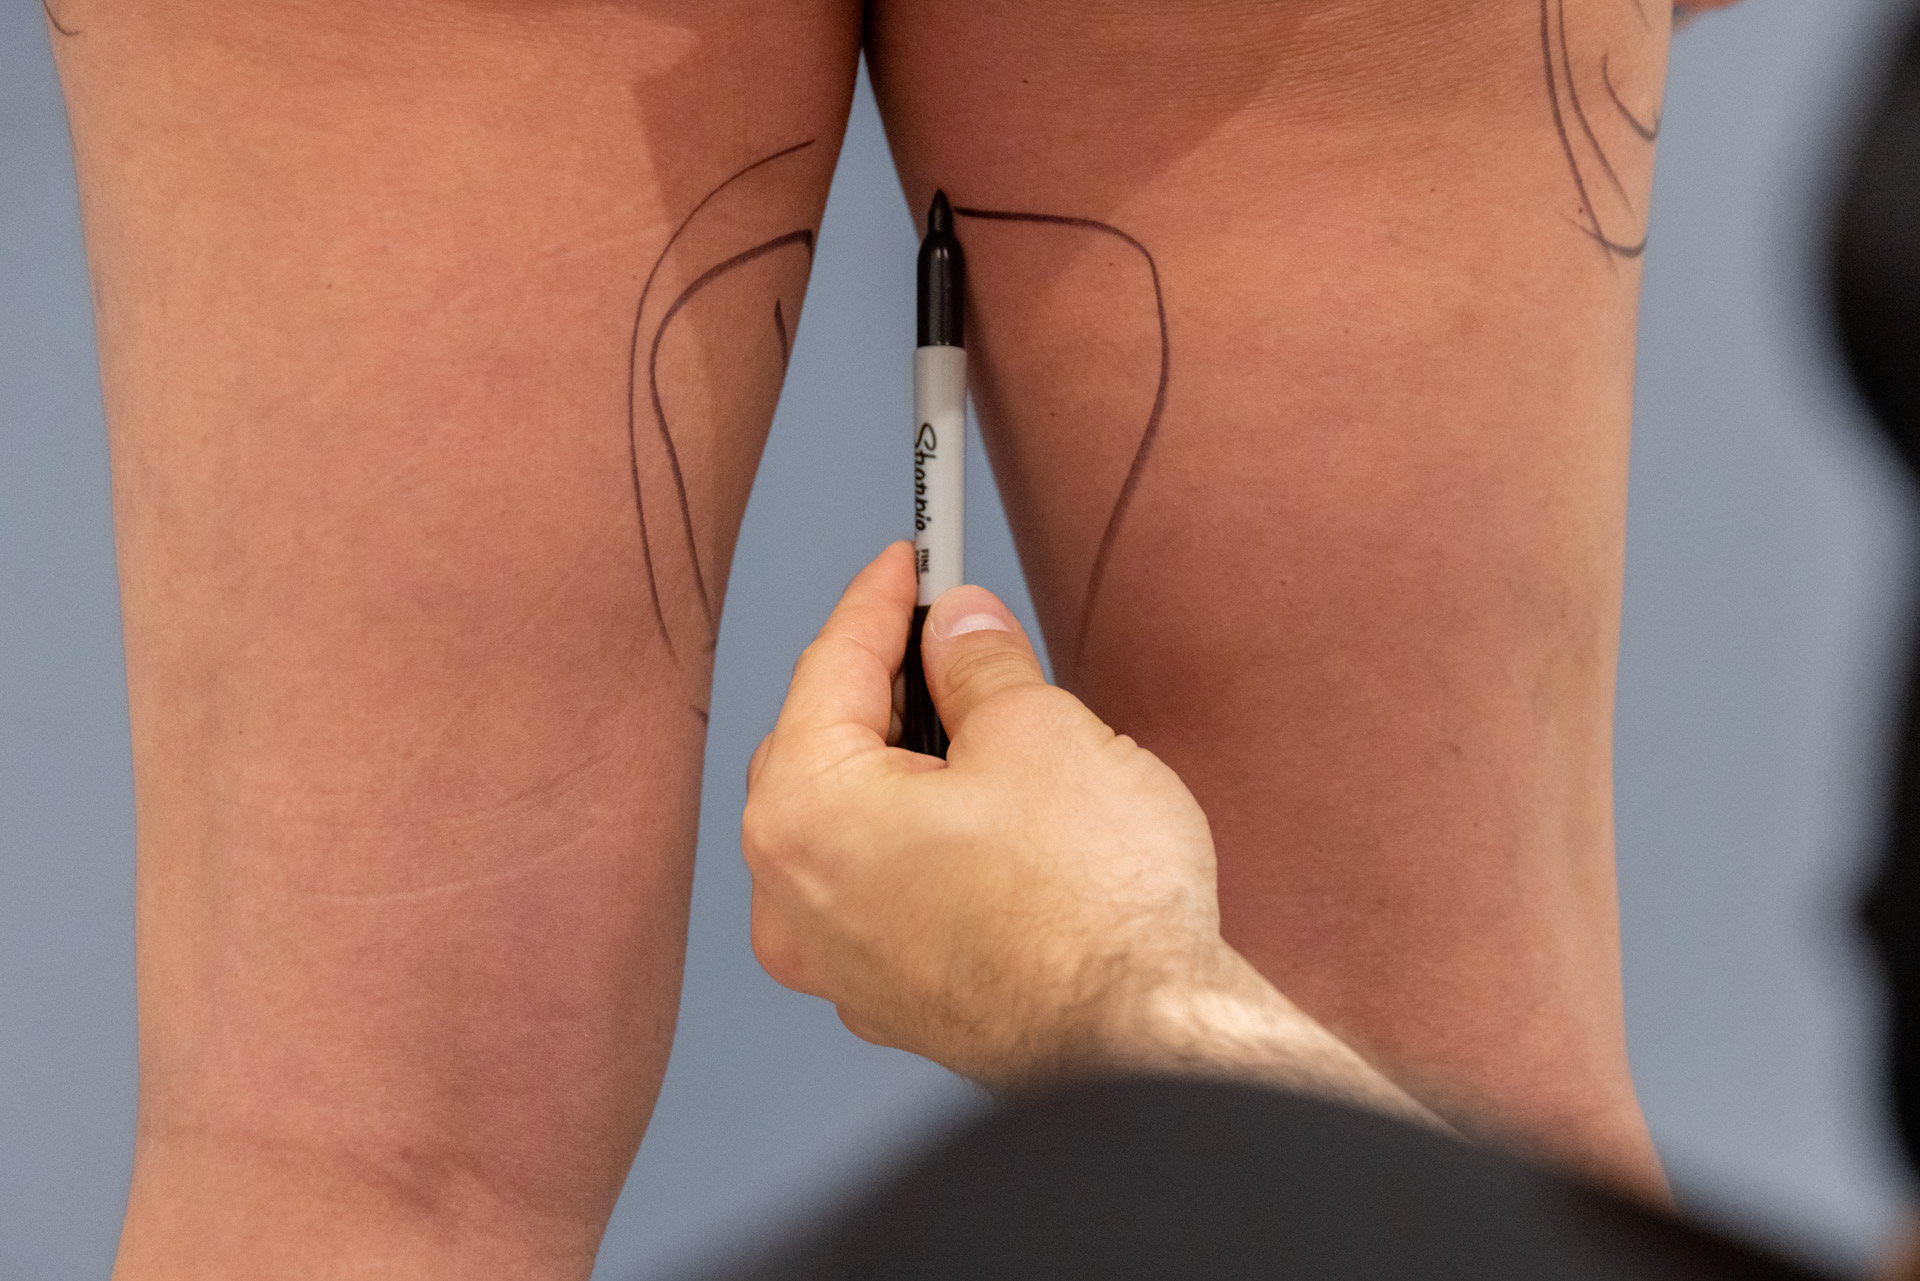 Dr. Stein Surgical Consultation drawn on the patient's inner thighs